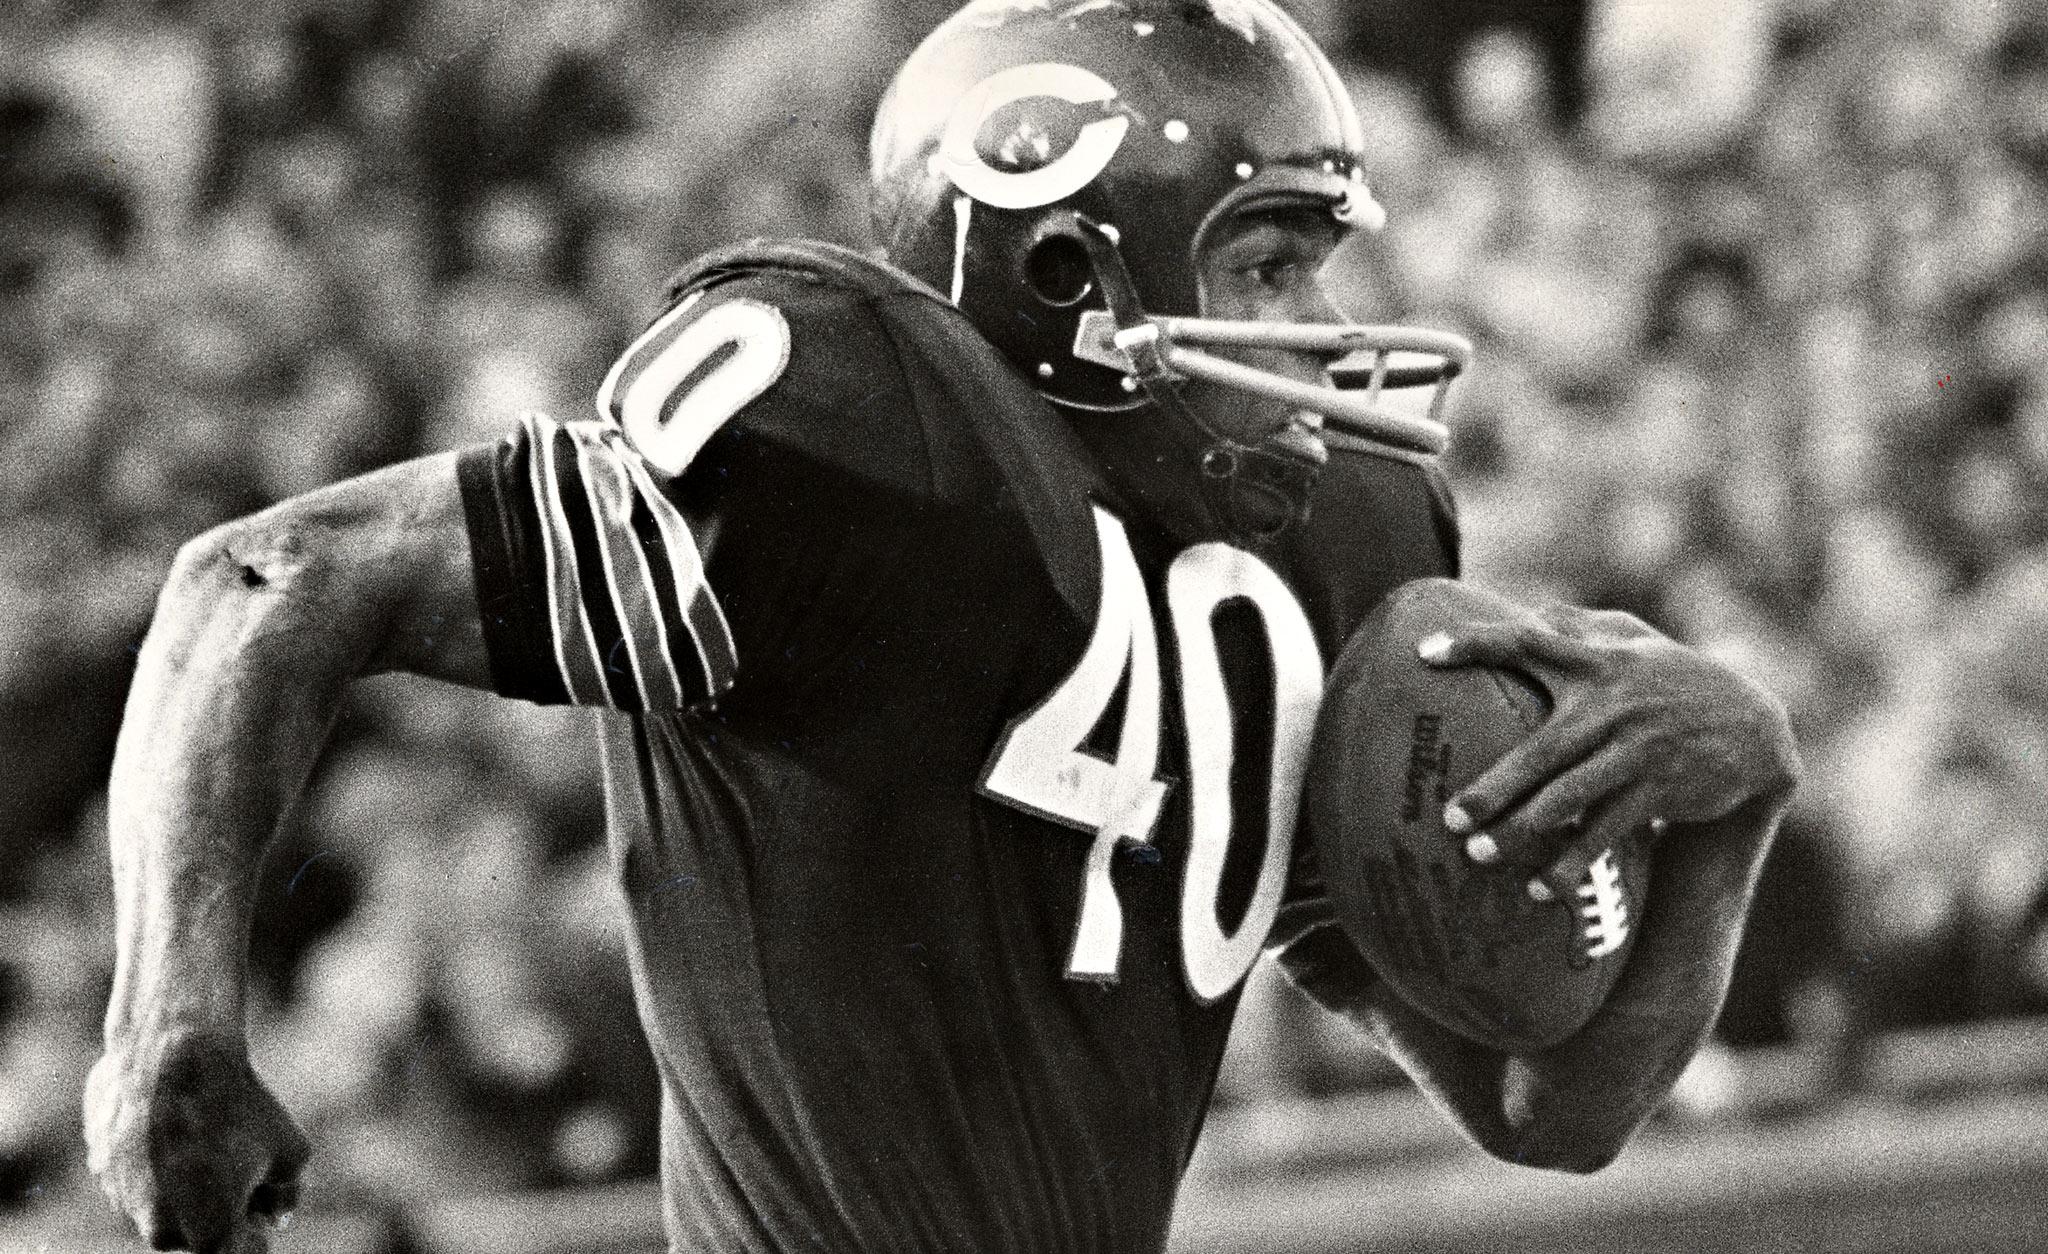 Happy Birthday to Gale Sayers, who turns 72 today! 